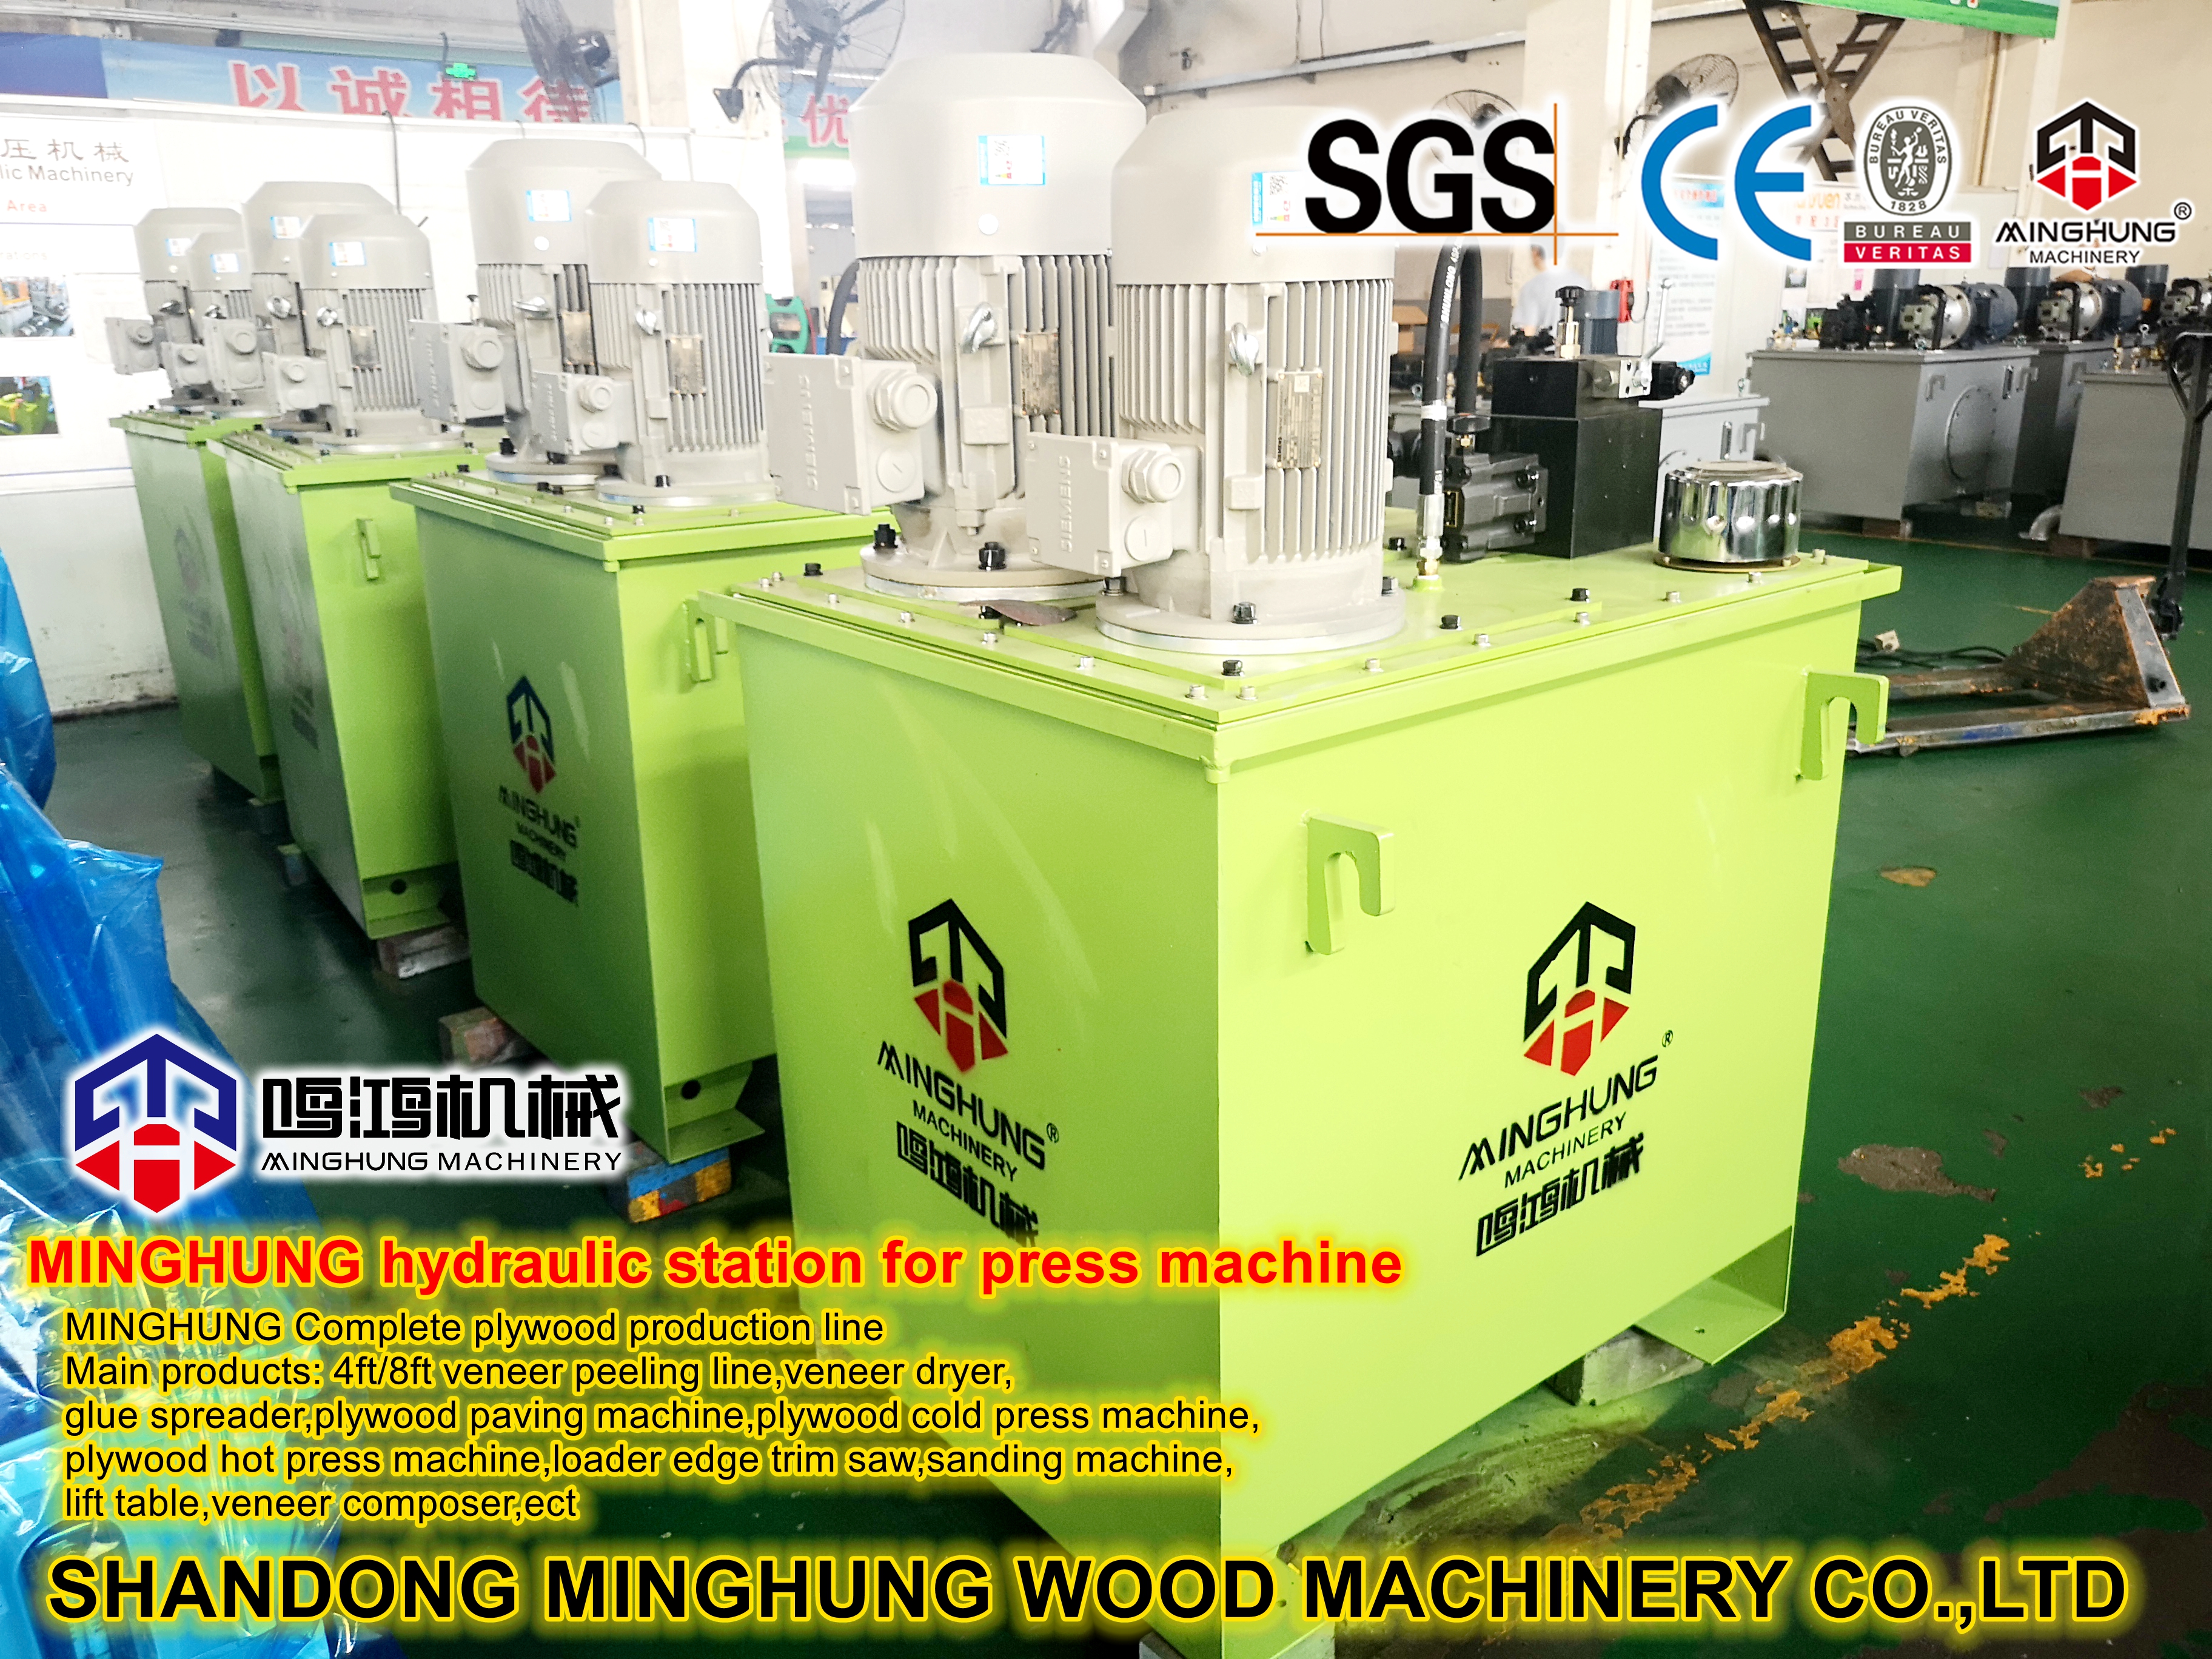 MINGHUNG Hydraulic station for press machine